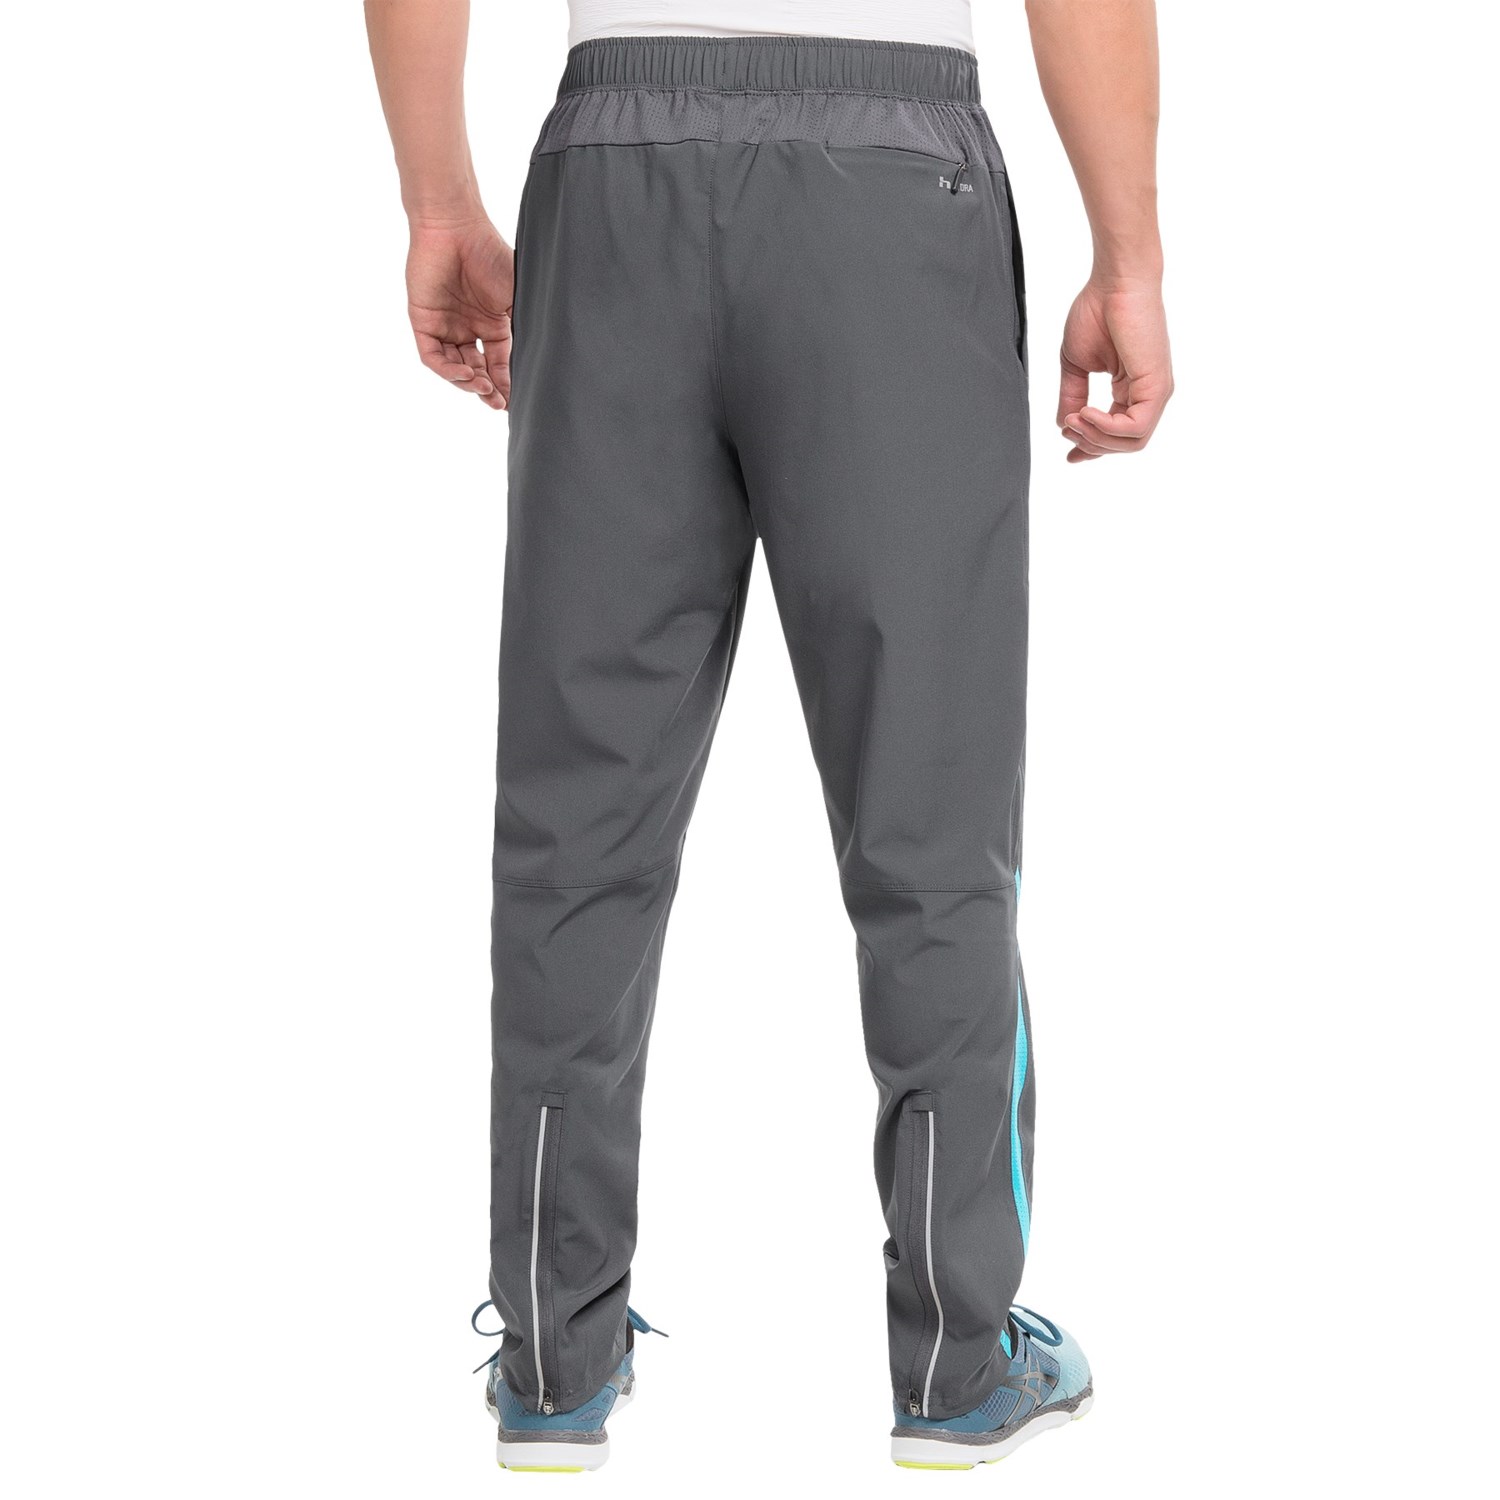 Hind Woven Stretch Running Pants (For Men) - Save 56%